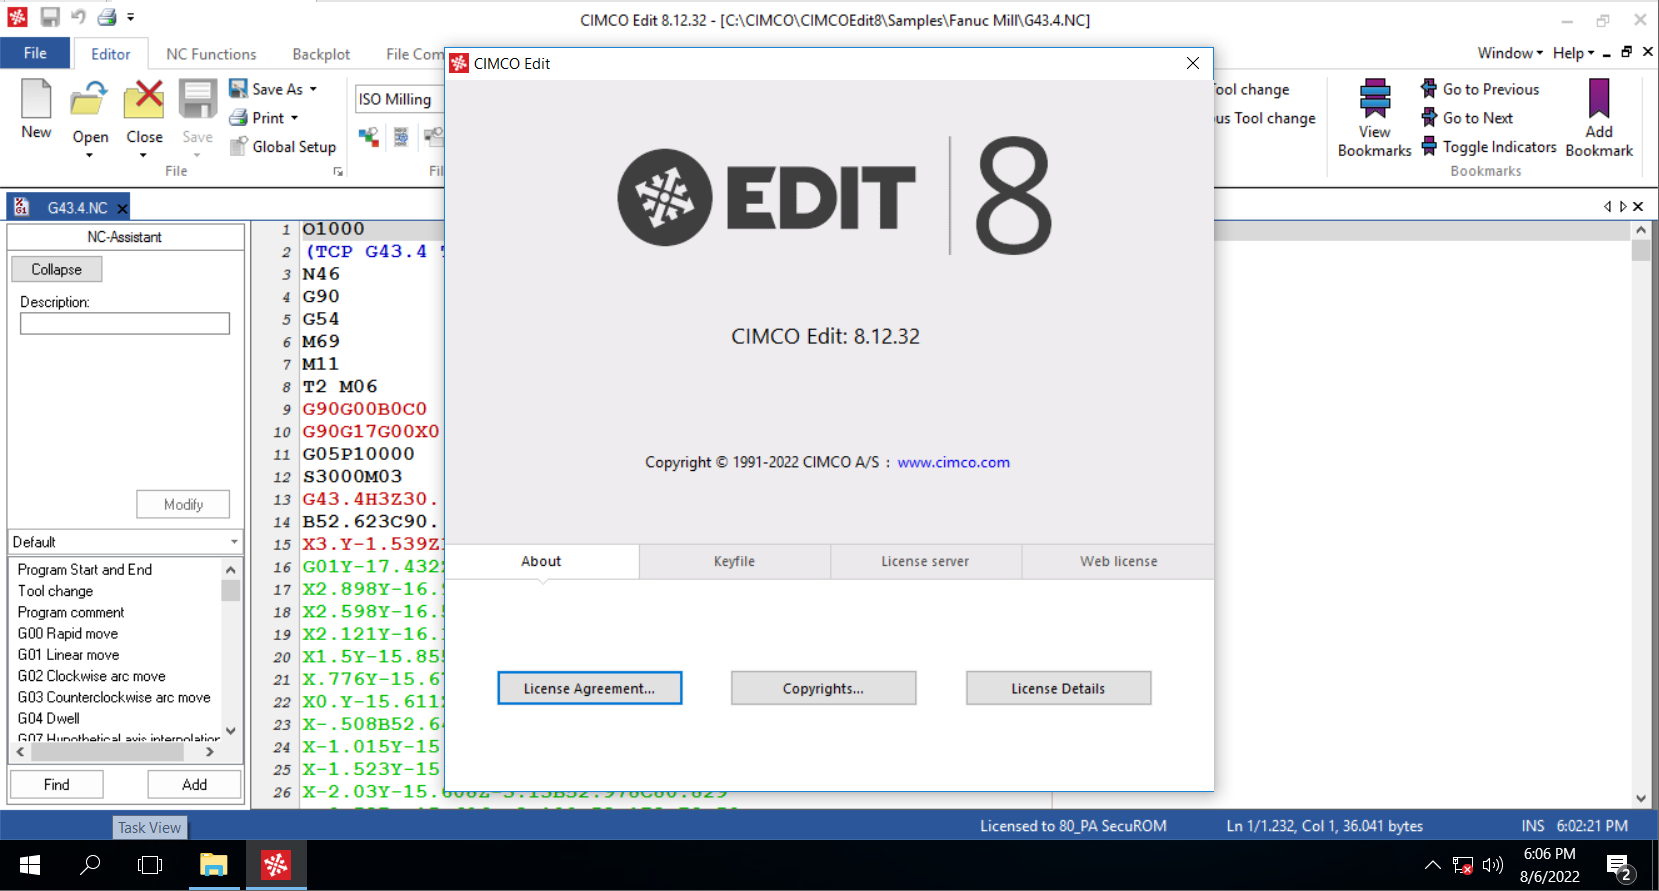 Working with CIMCO Edit 8.12.32 full